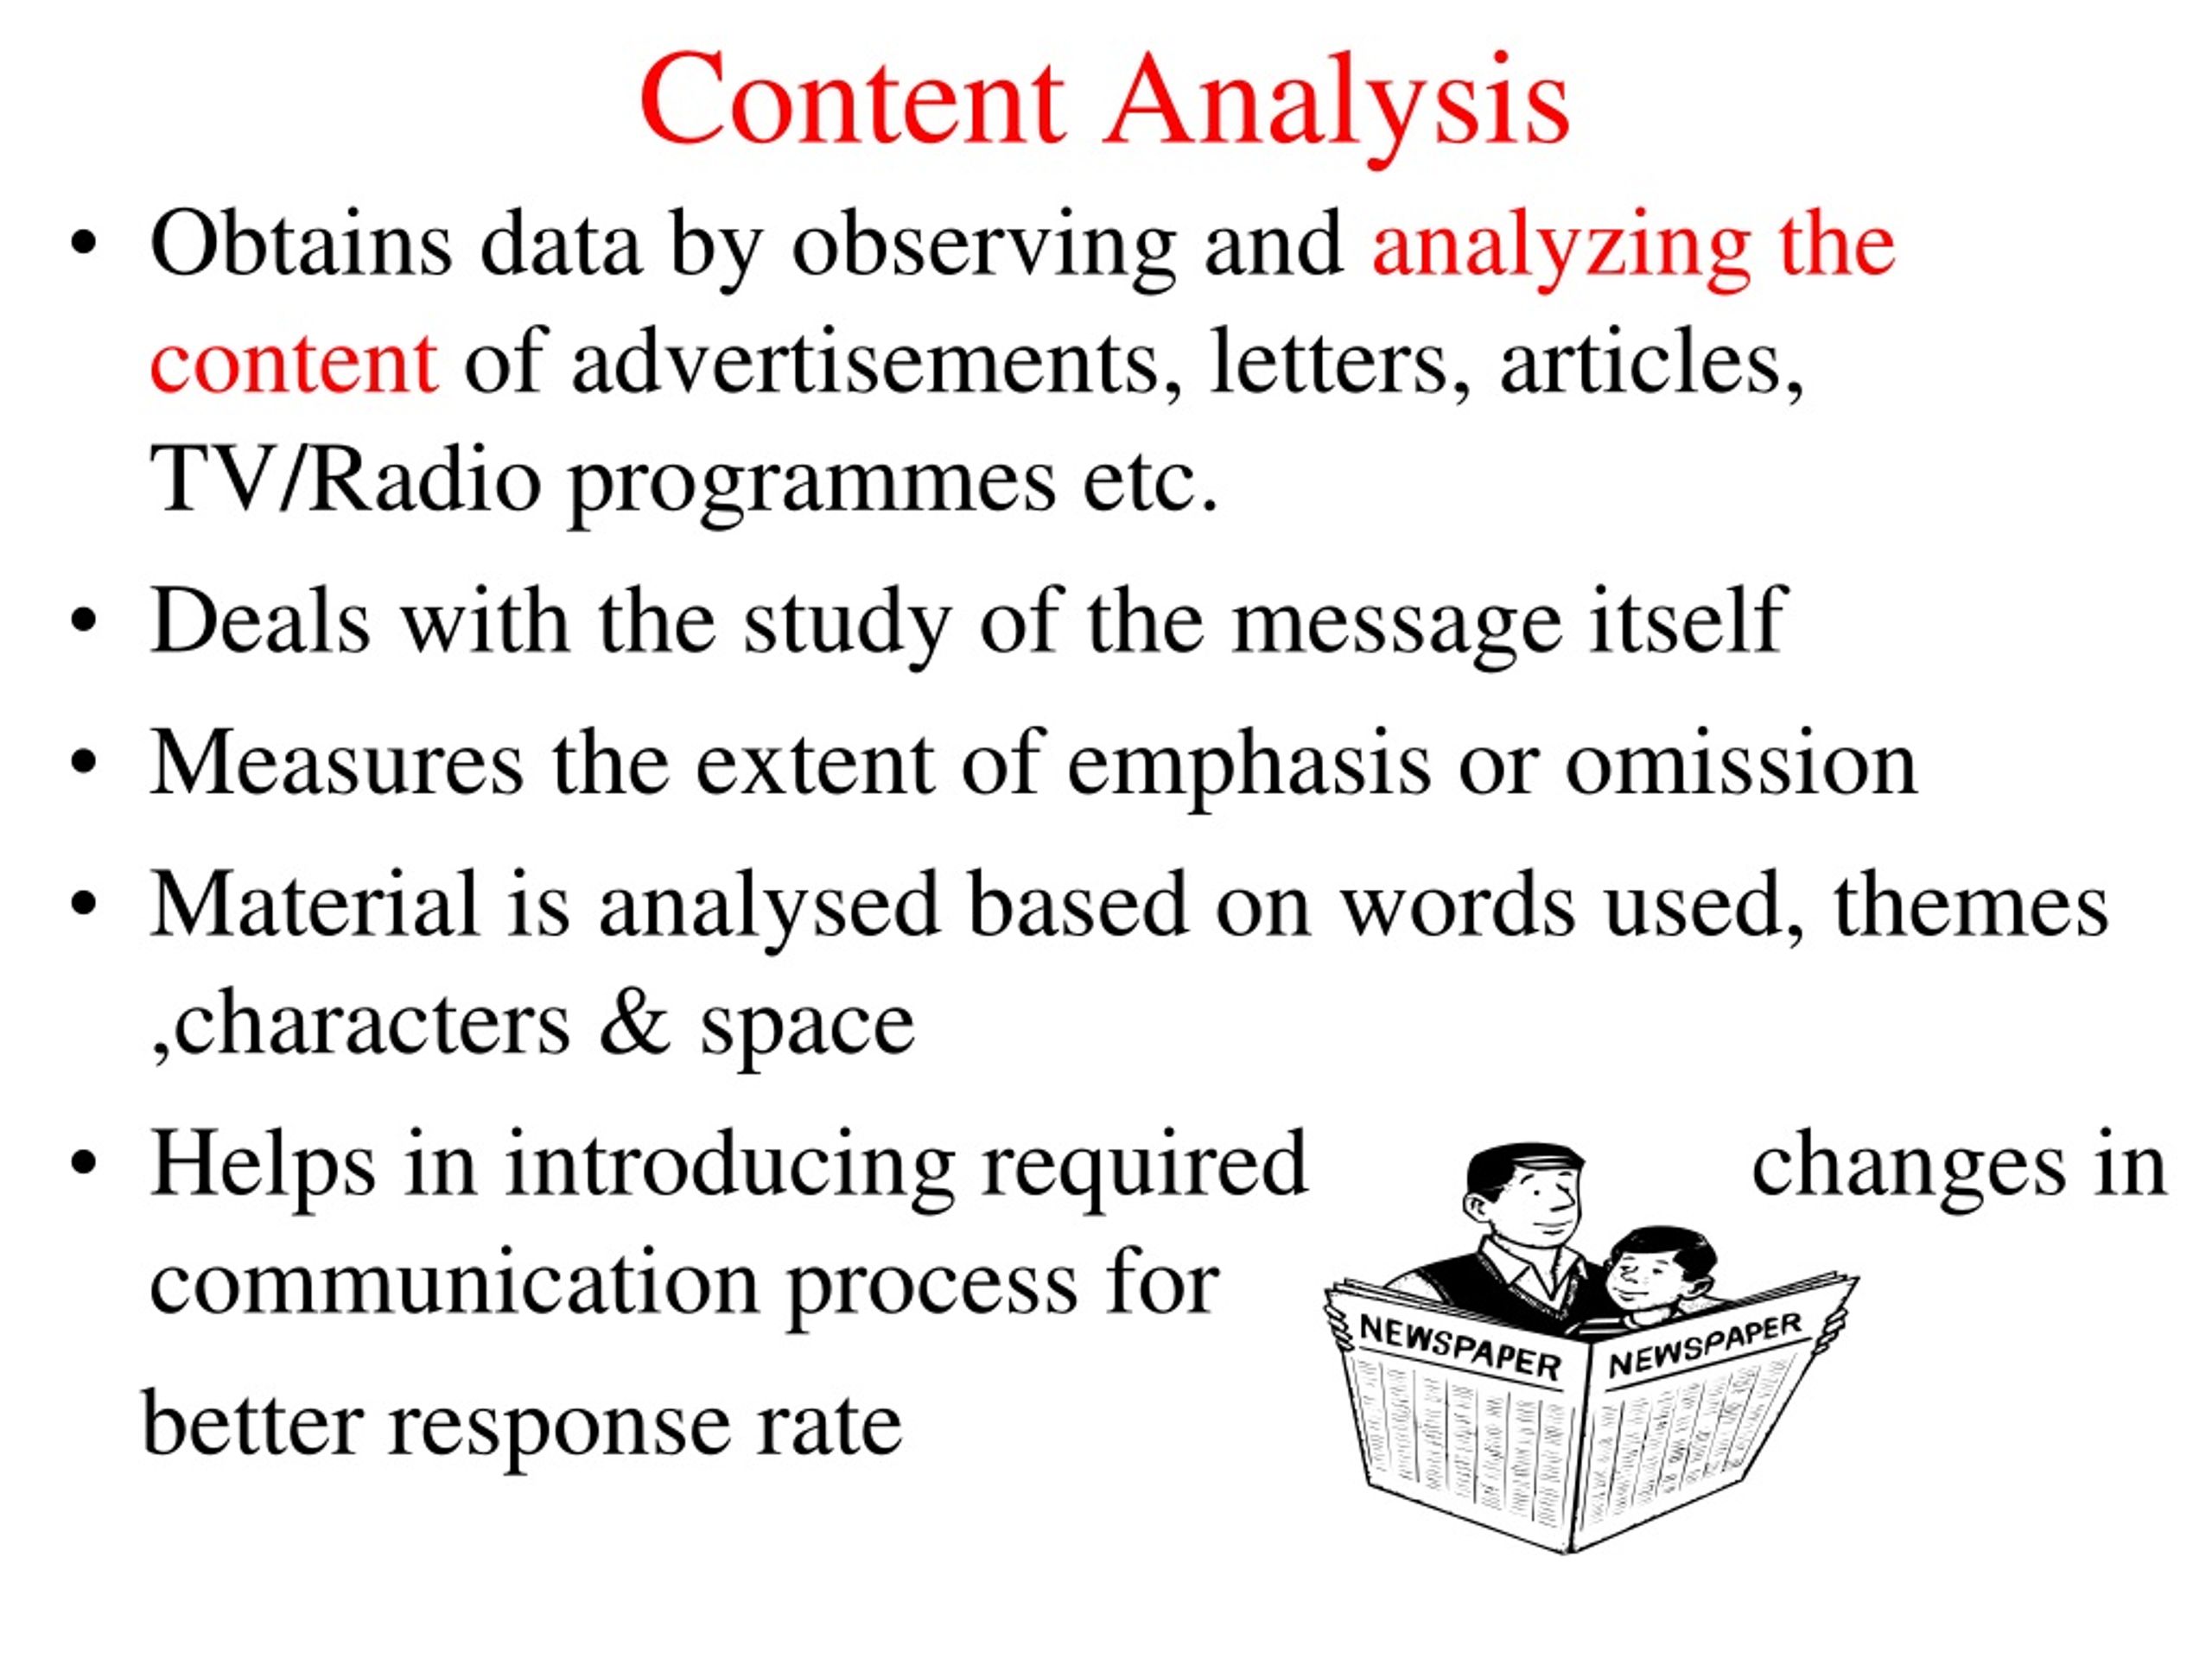 content analysis historical research